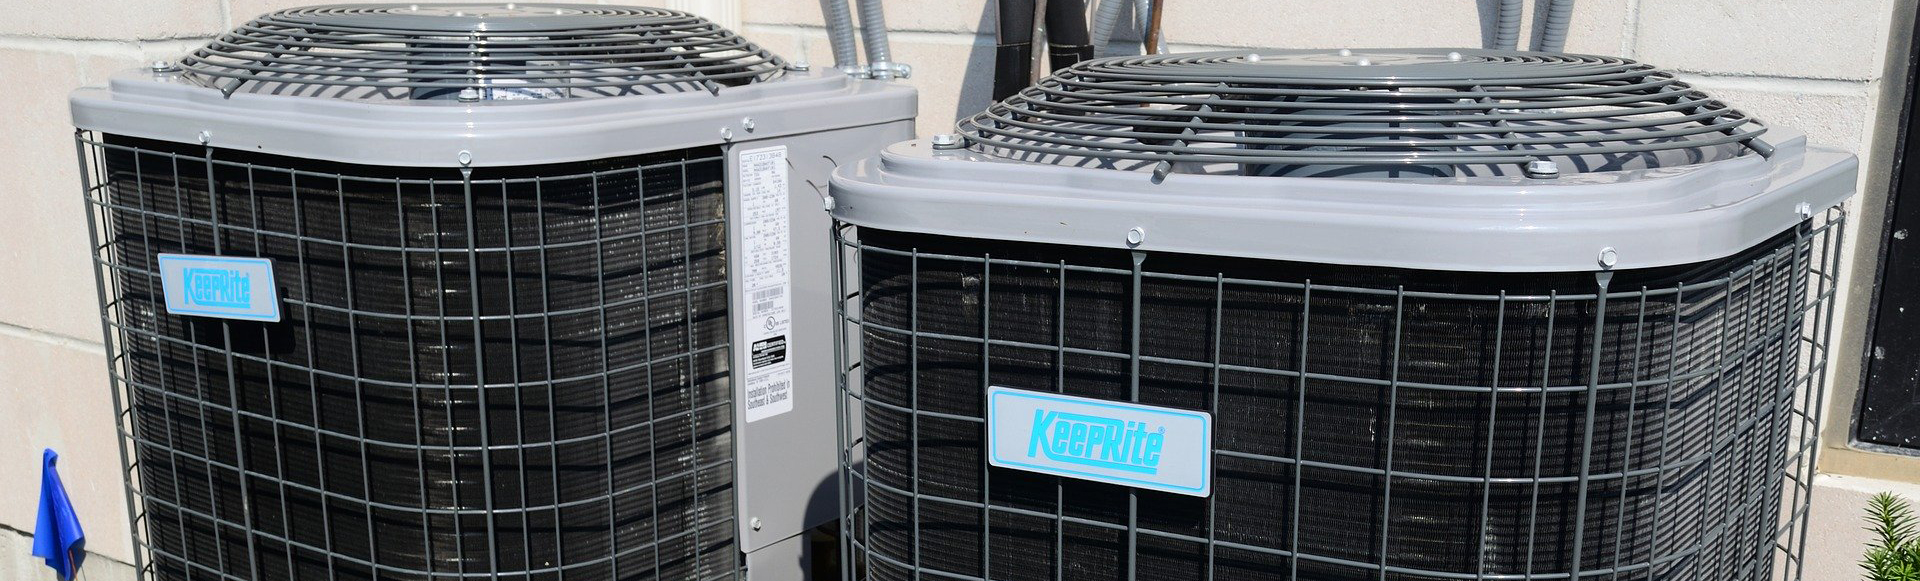 HomeServe Repairs Air Conditioner Just in Time for Summer Heat